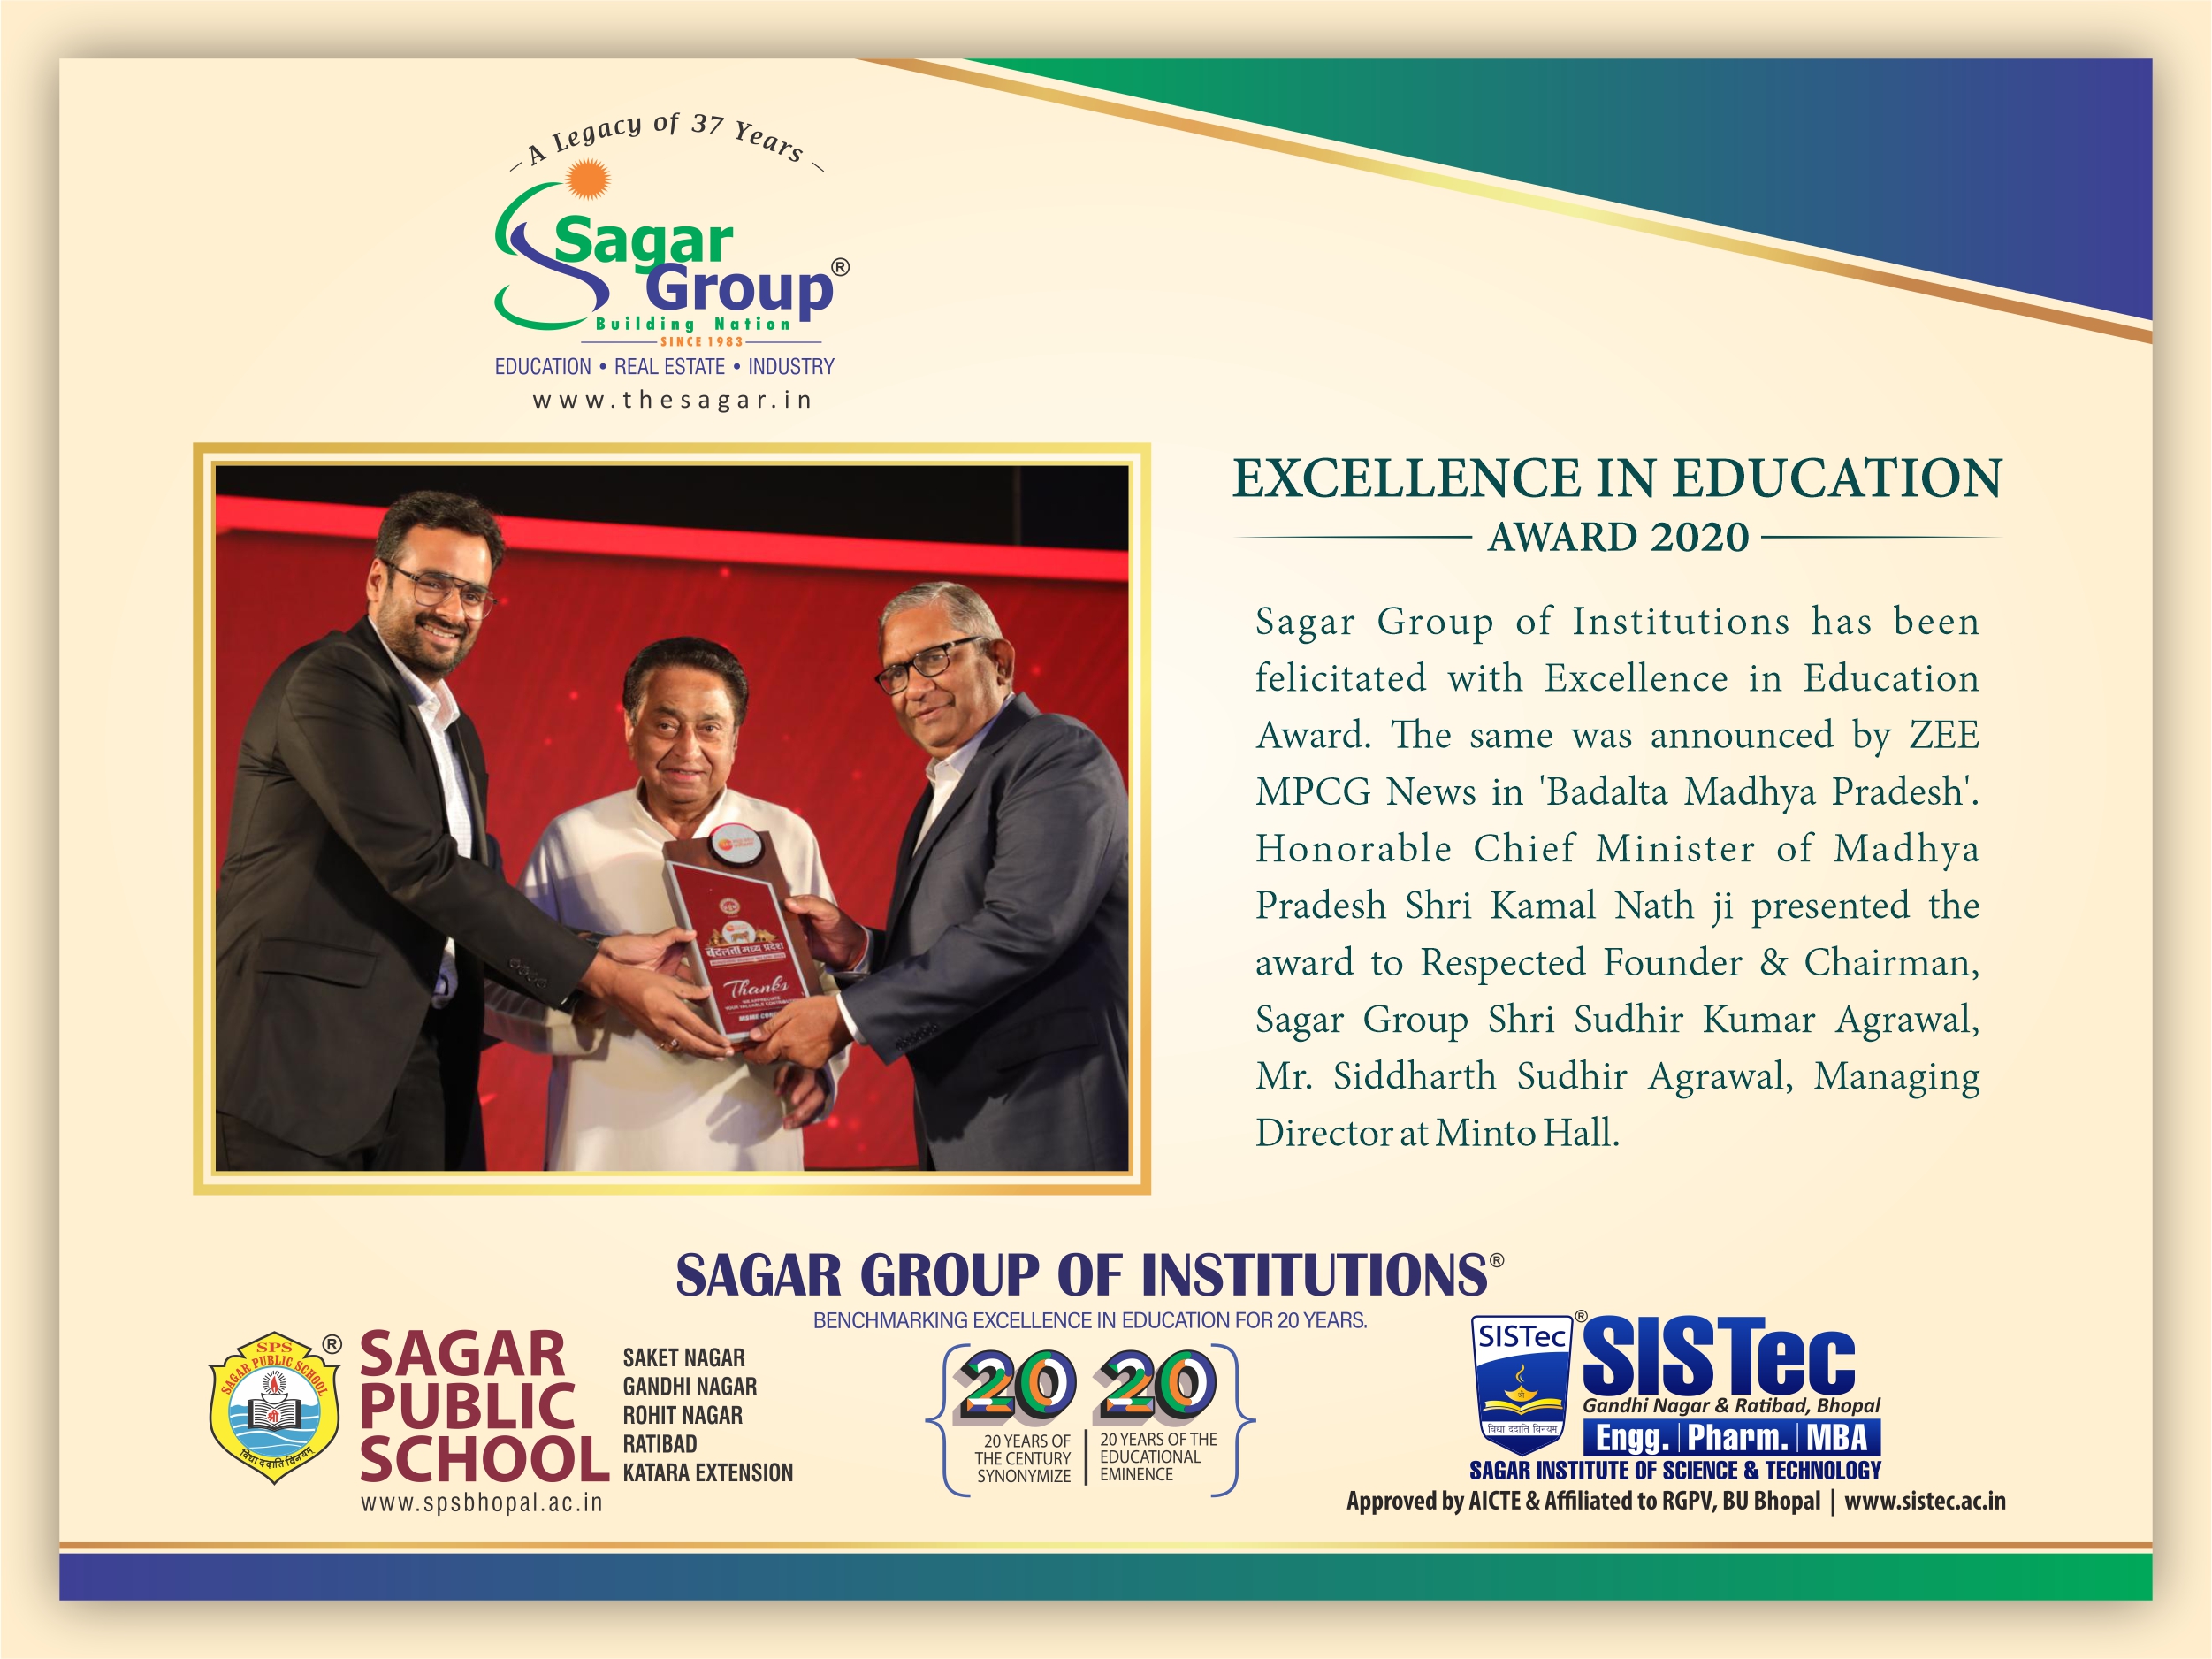 Sagar Group of Institutions-SISTec has been felicitated with “Excellence in Education Award”